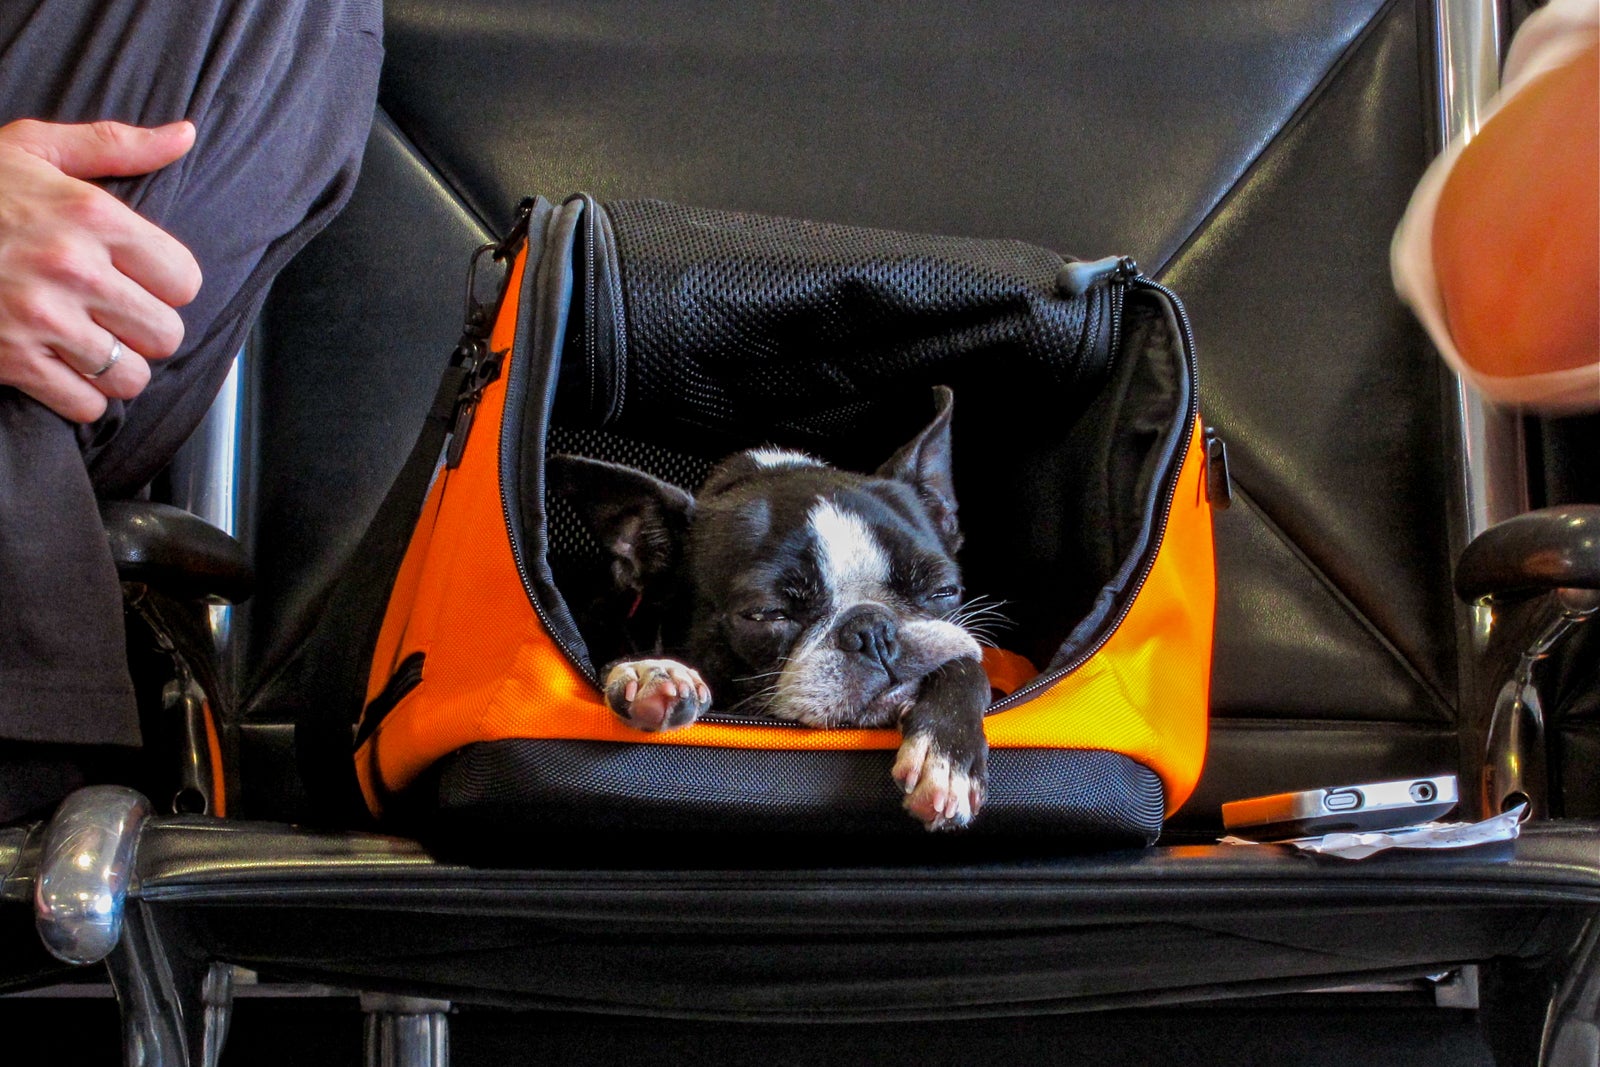 Southwest Airlines pet policy Here’s how to fly with your cat or dog